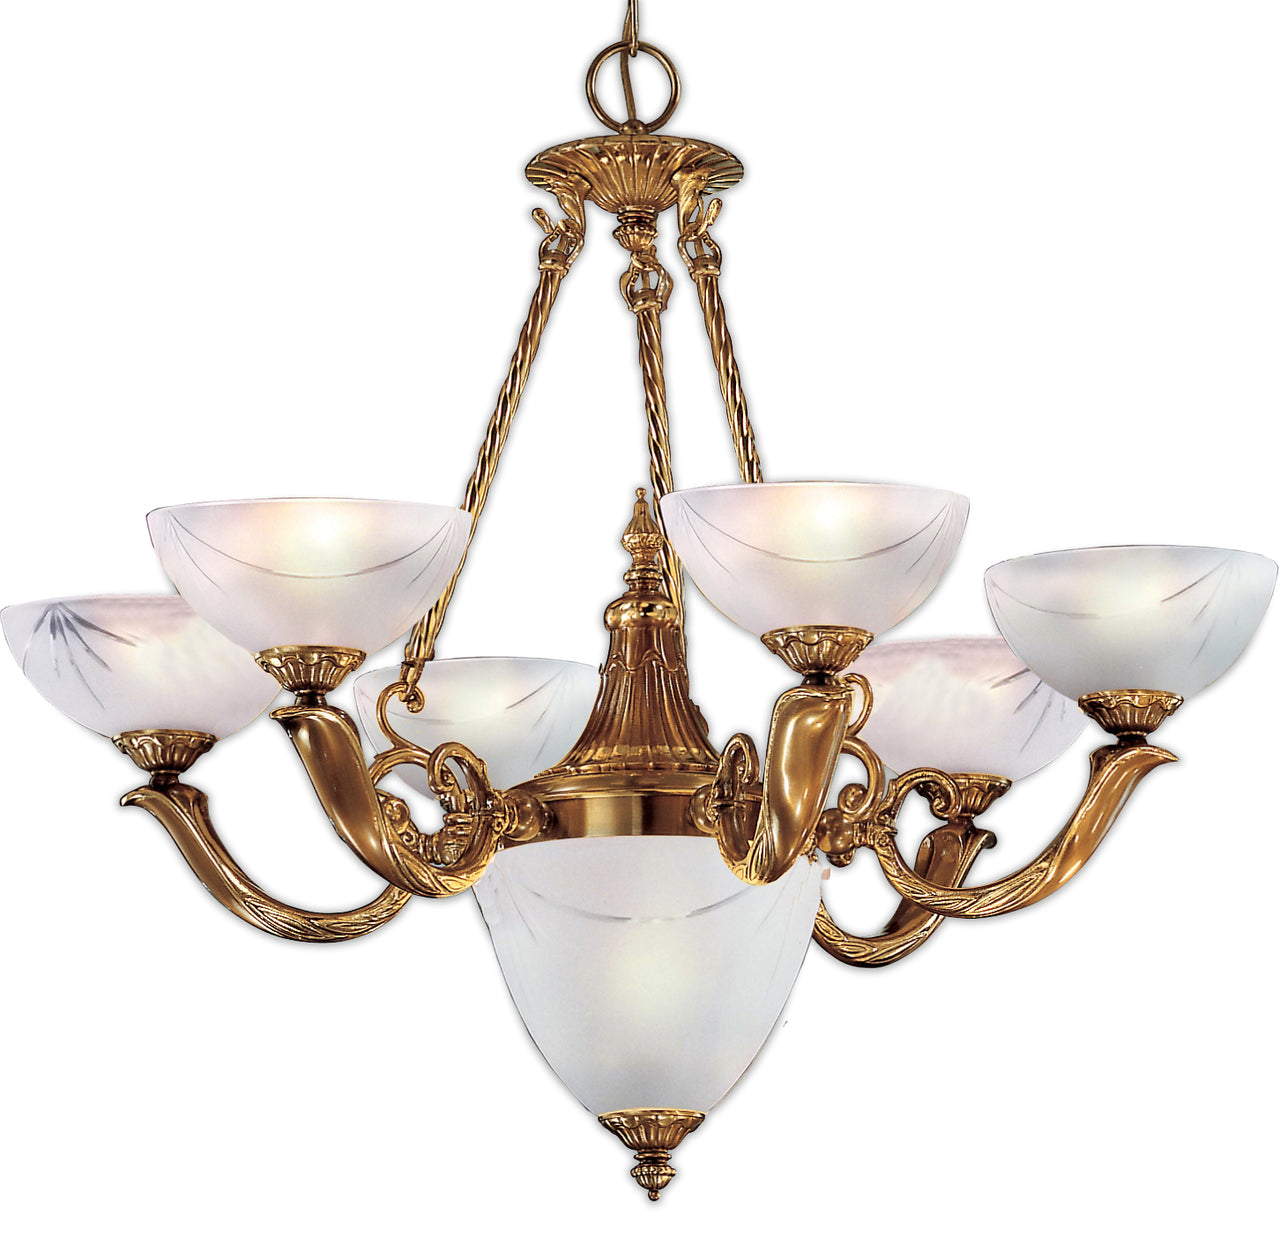 Classic Lighting 5657 ABZ Valencia Traditional Chandelier in Antique Bronze (Imported from Spain)